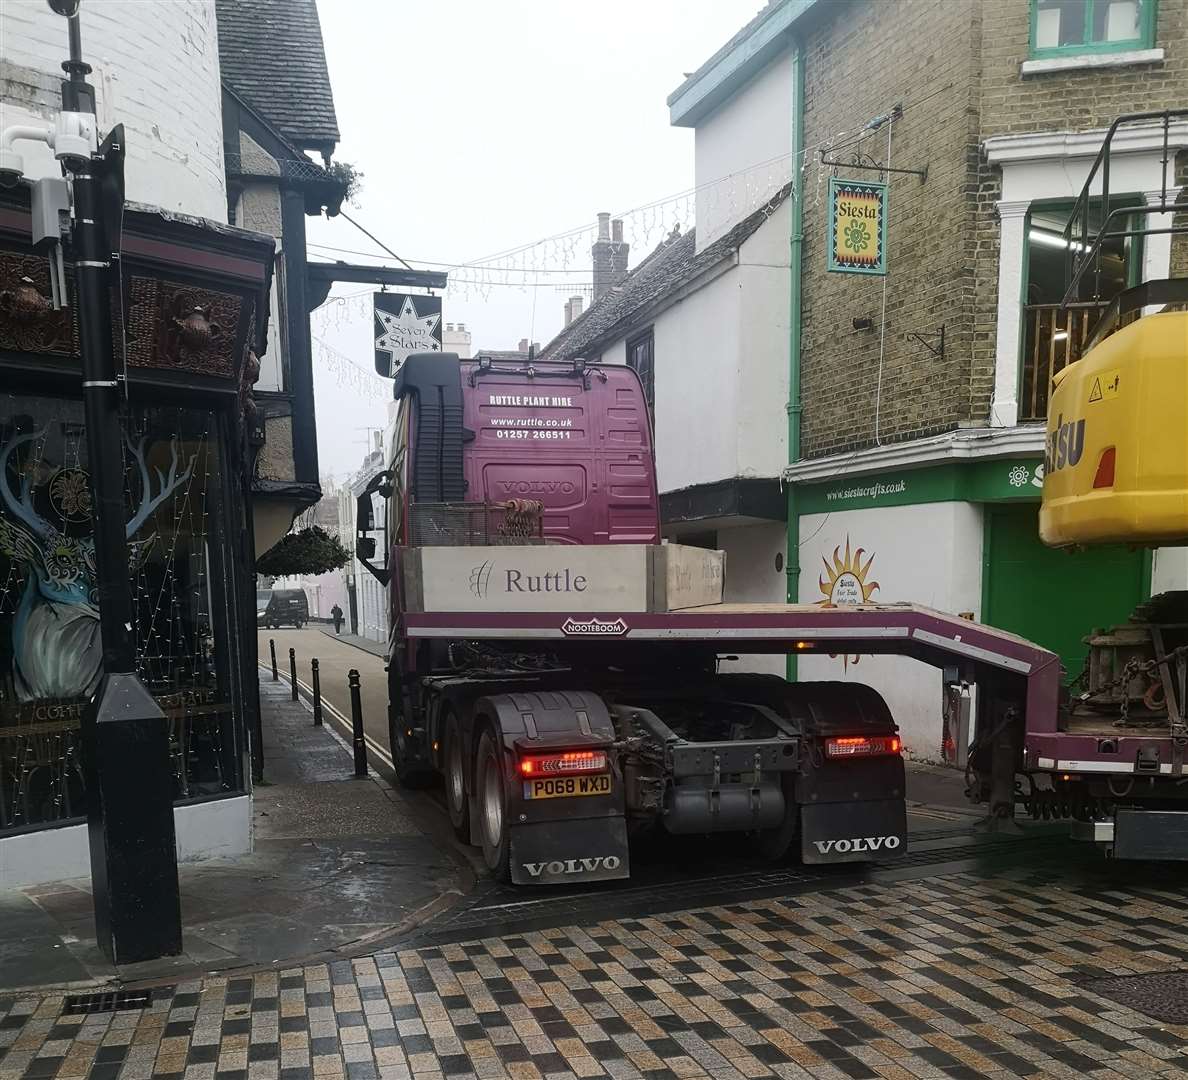 The vehicle was seen struggling to turn around near the Seven Stars pub in Canterbury